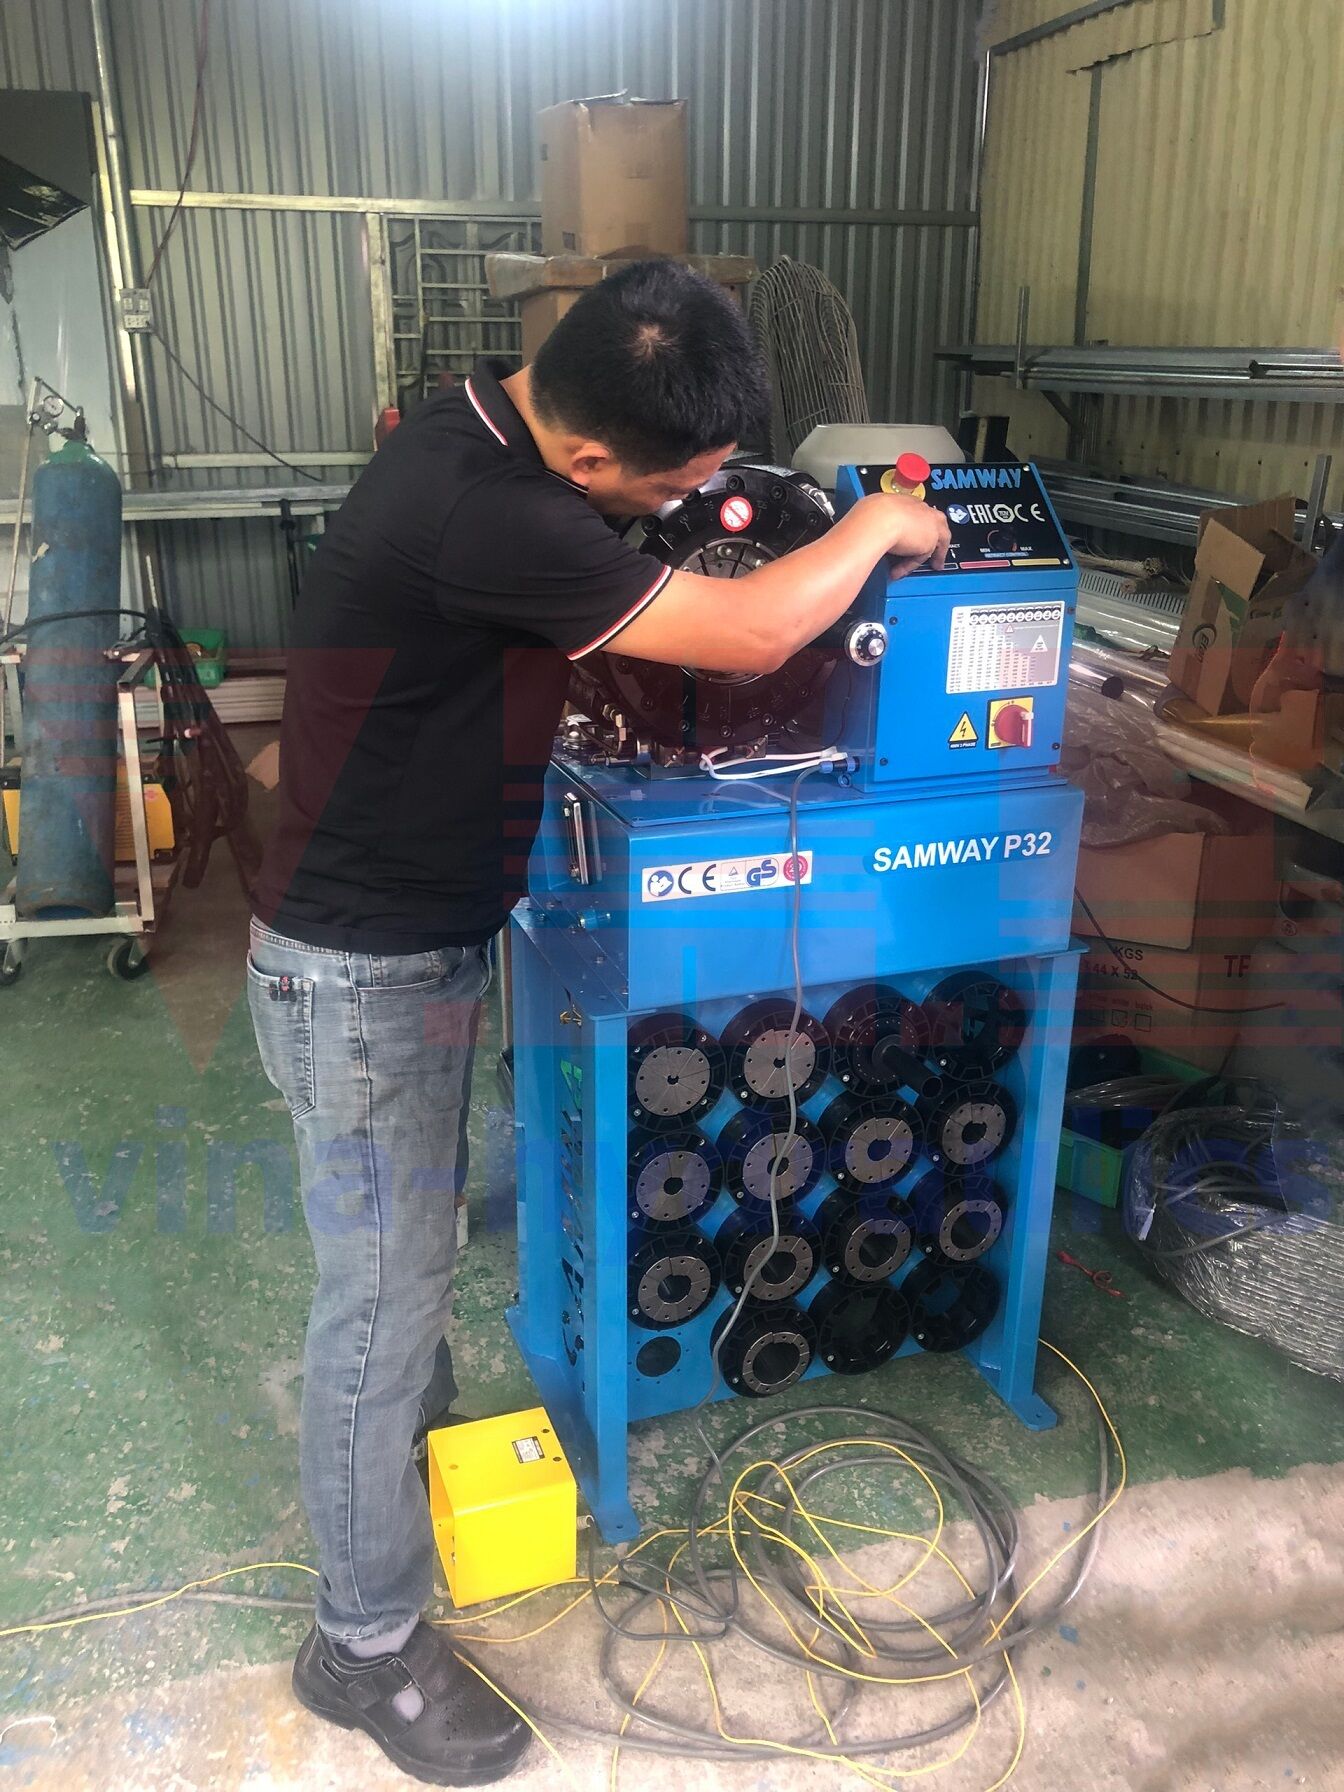 genuine P23 SAMWAY hydraulic hose pressing machine at a good prices in Sai Gon